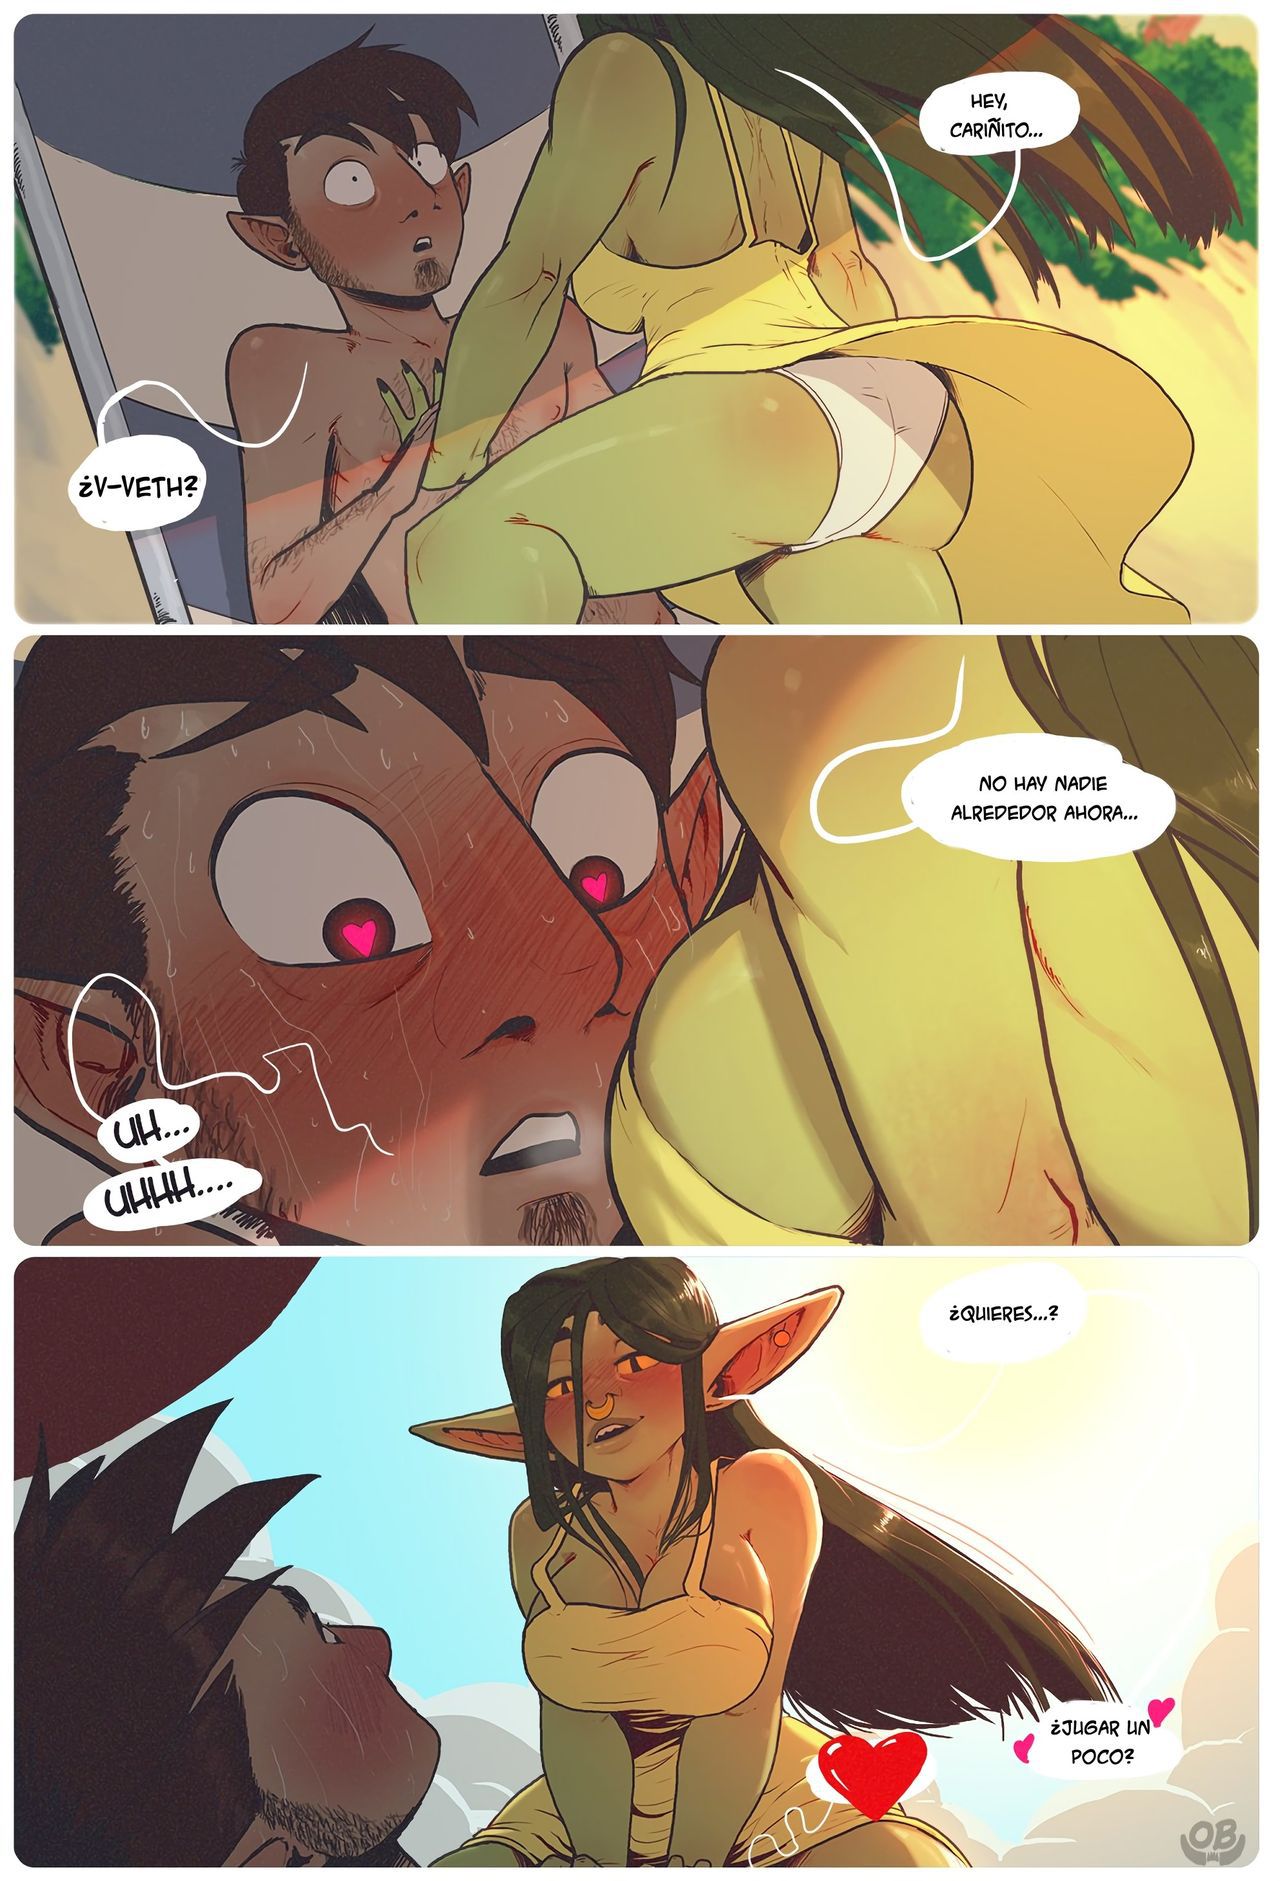 [Orcbarbies] Beach Day in Xhorhas [Ongoing] [Spanish] 5